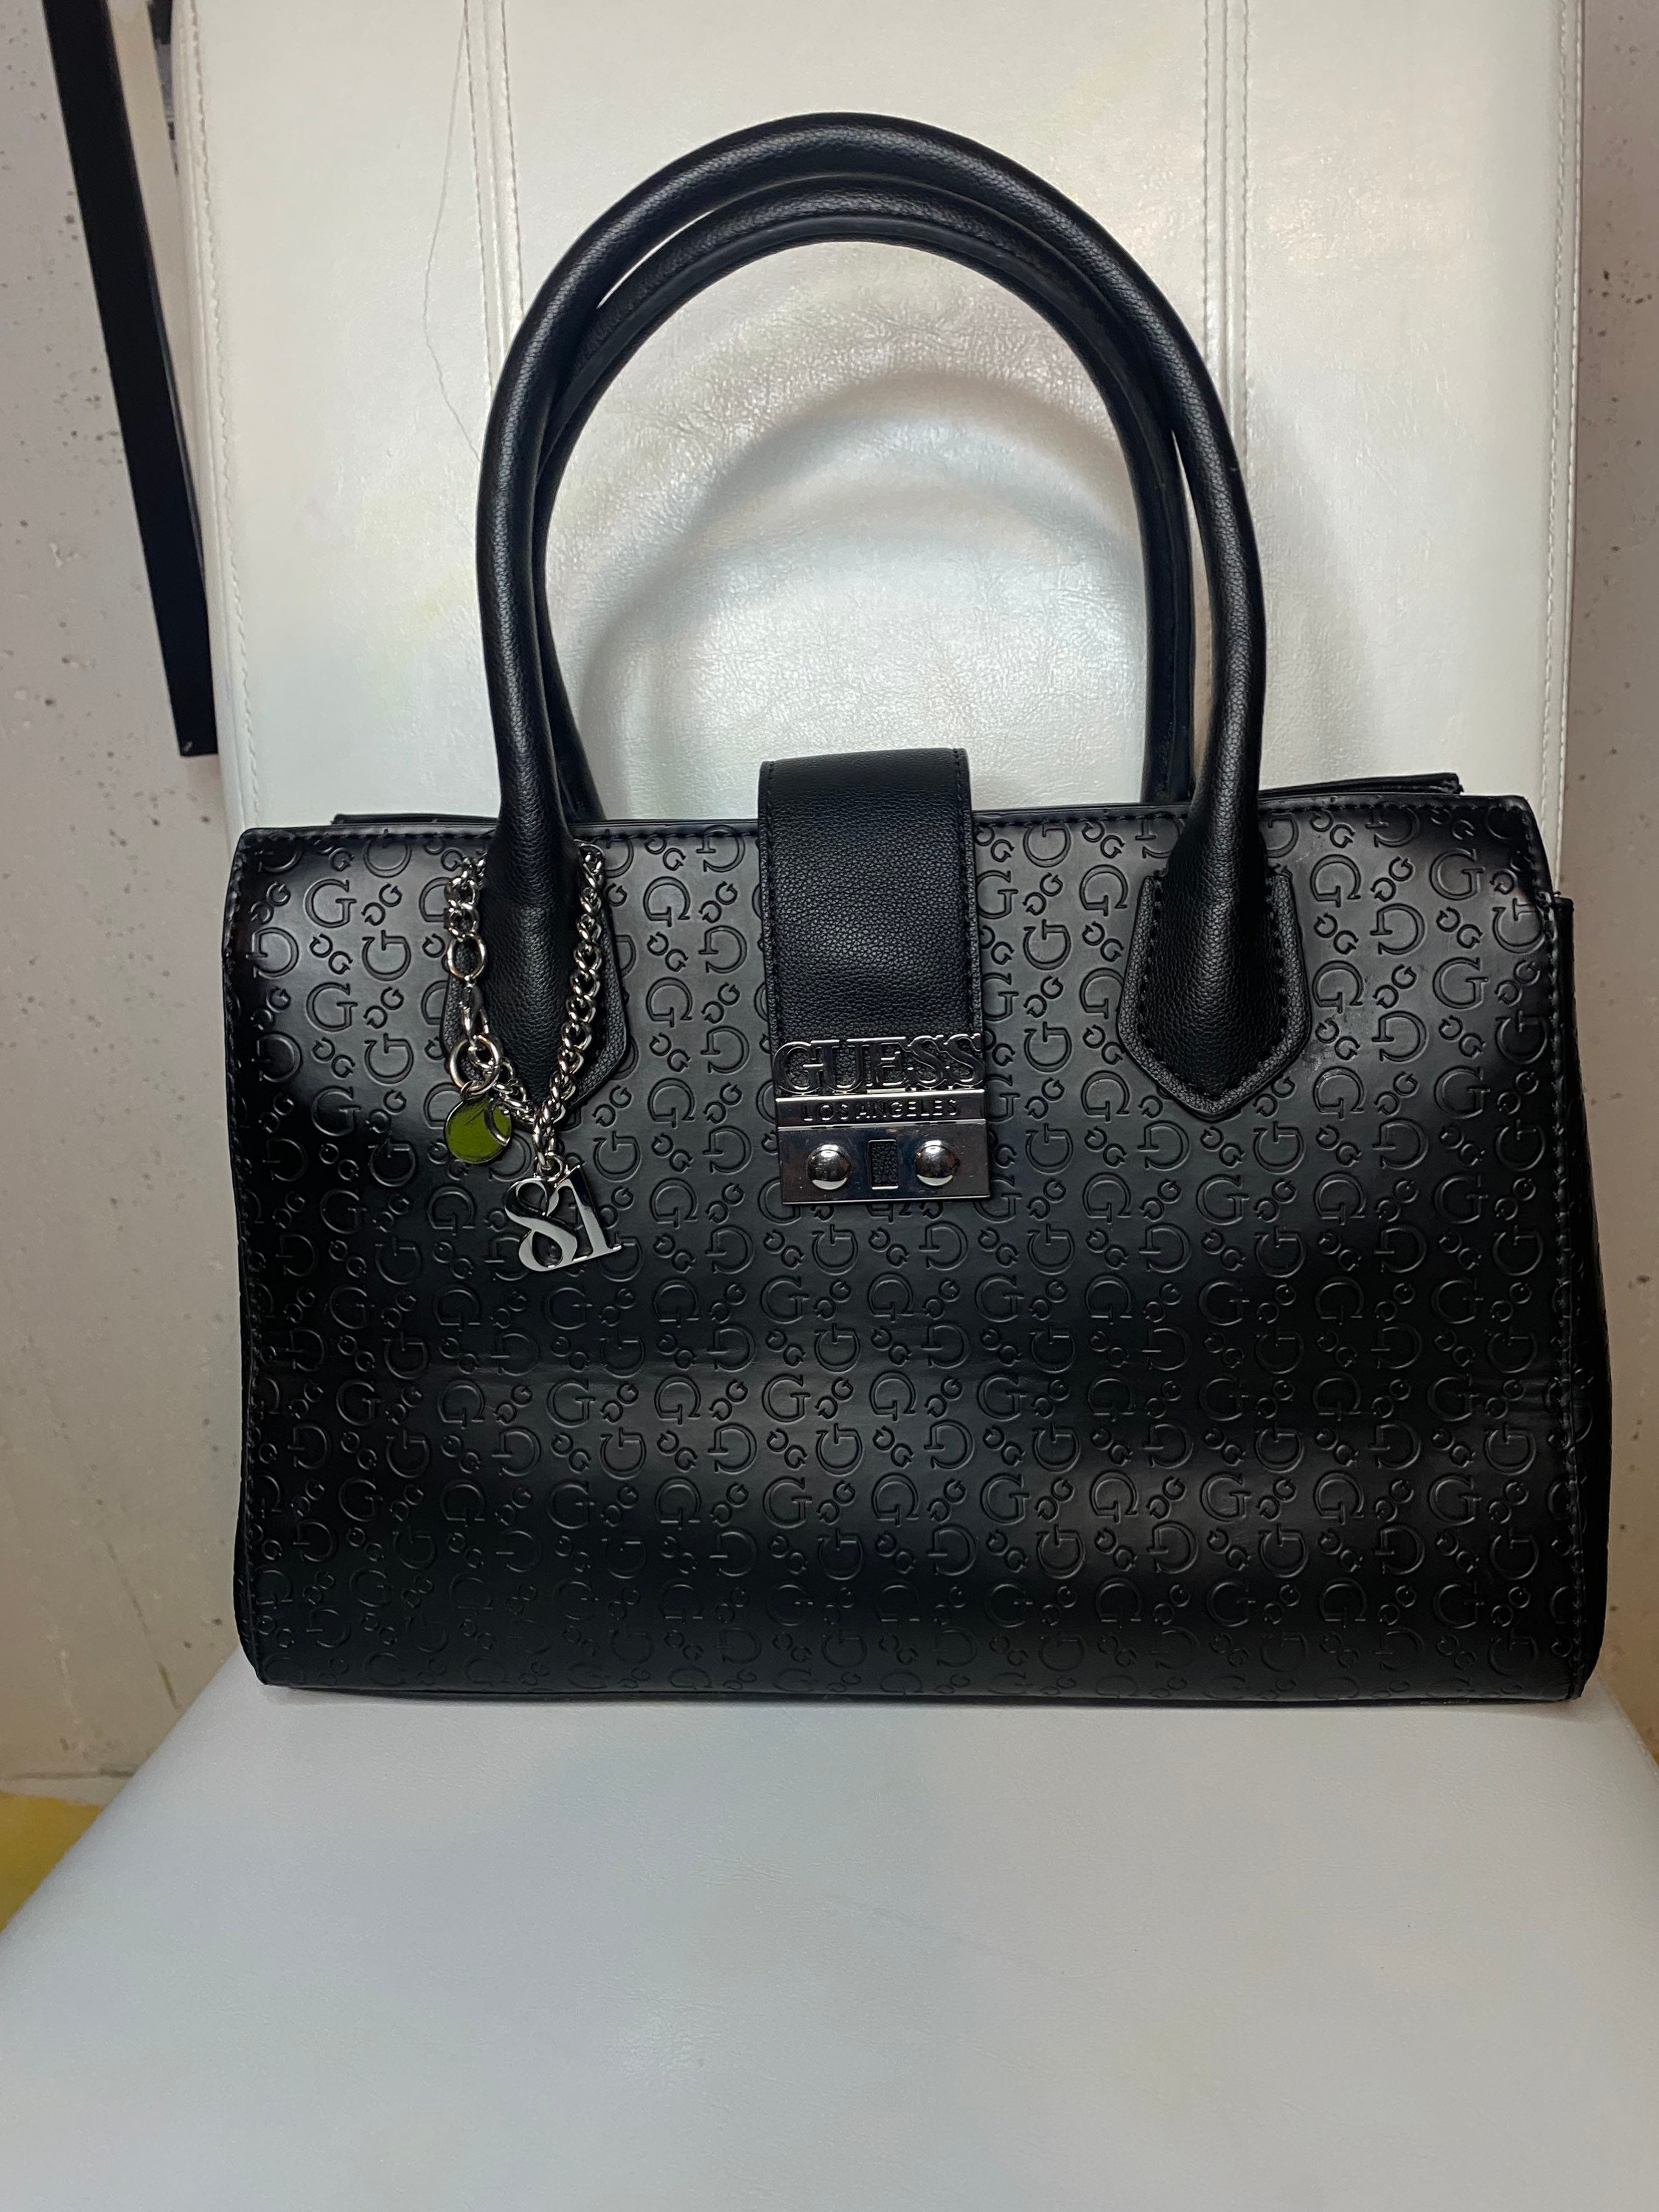 Guess - Authenticated Handbag - Black for Women, Very Good Condition